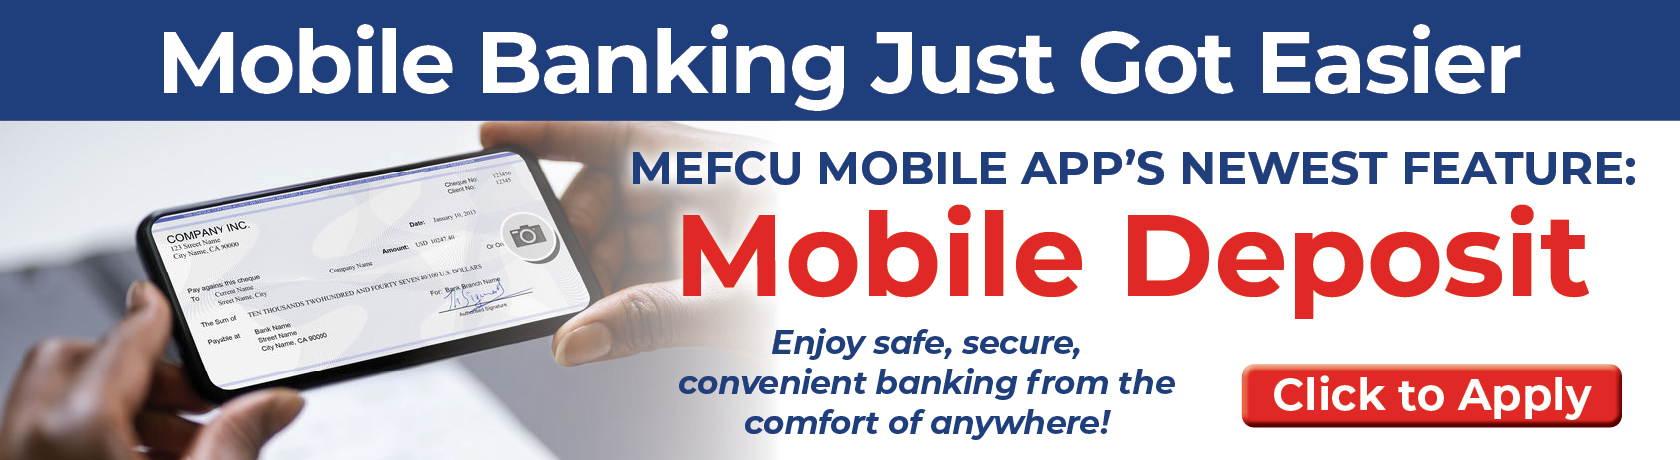 Mobile Banking Just Got Easier MEFCU MOBILE APP'S NEWEST FEATURE: Mobile Deposit Enjoy safe, secure, convenient banking from the comfort of everywhere!
Click to Apply